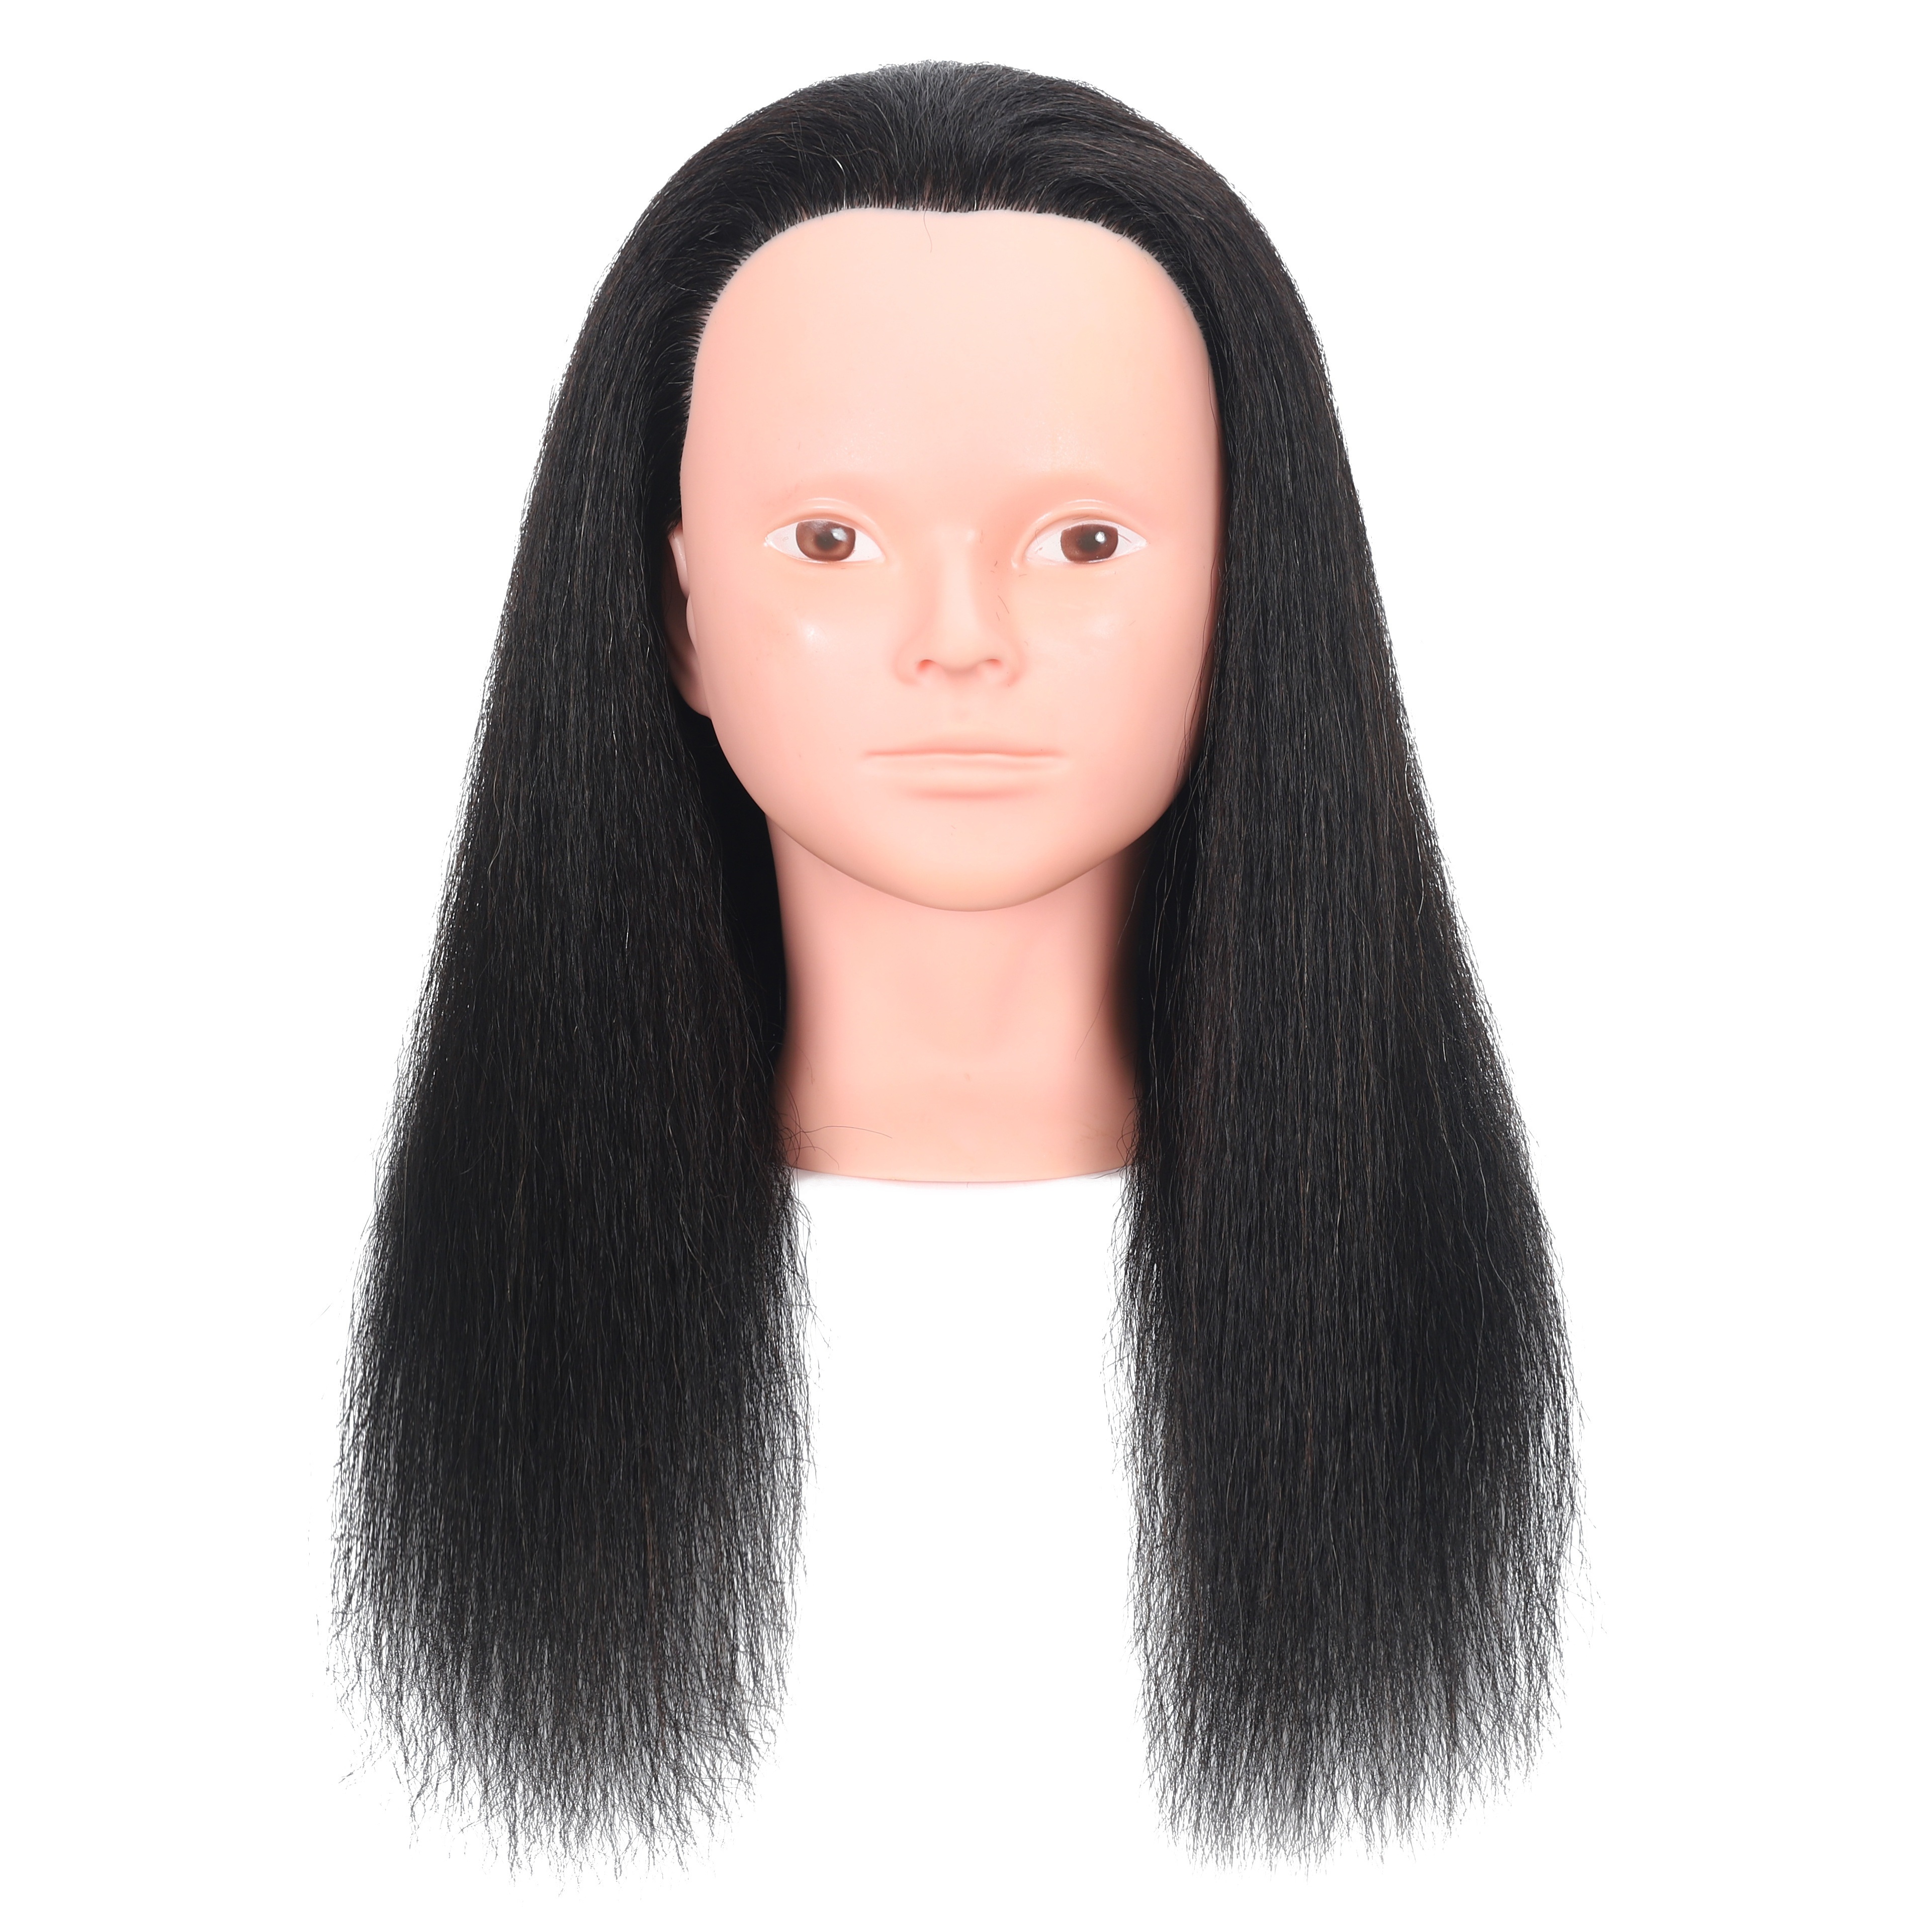 100% Hair Professional Styling Mannequin Head For Braiding African  Mannequin Practice Dummy Head For Hairdressing Training